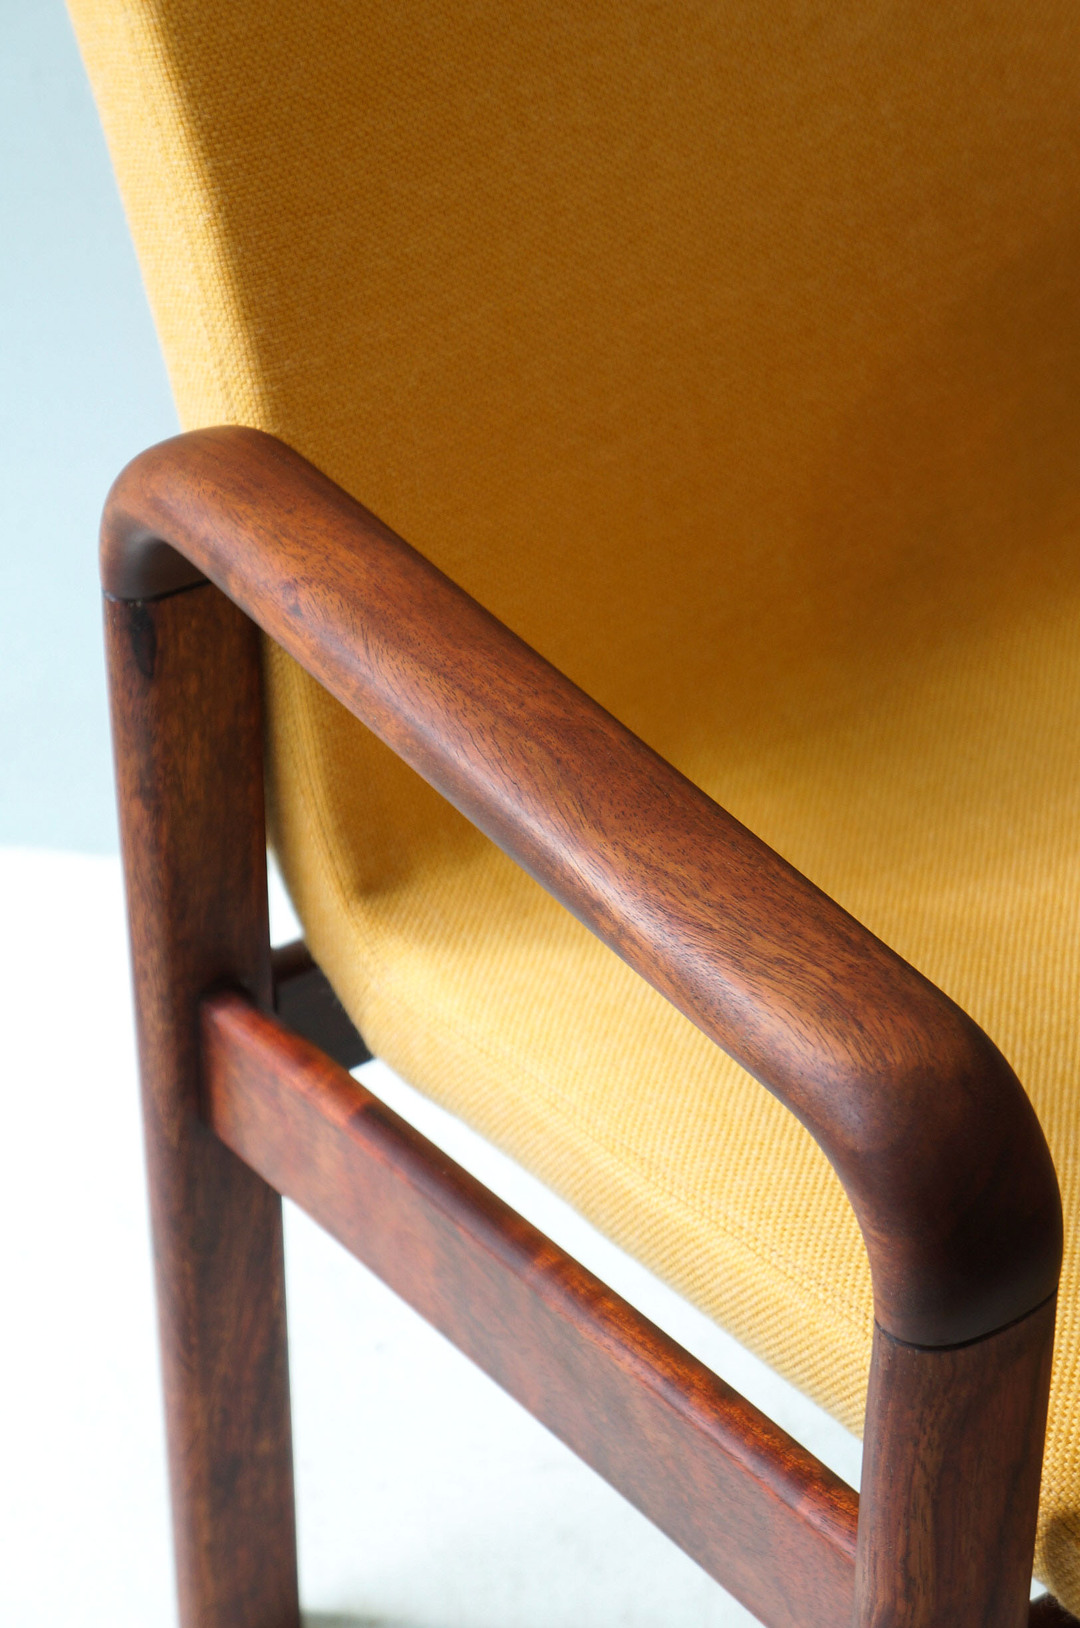 Danish Vintage Dyrlund Arm Chair/デンマーク ヴィンテージ デューロン アームチェア 北欧家具 イエロー